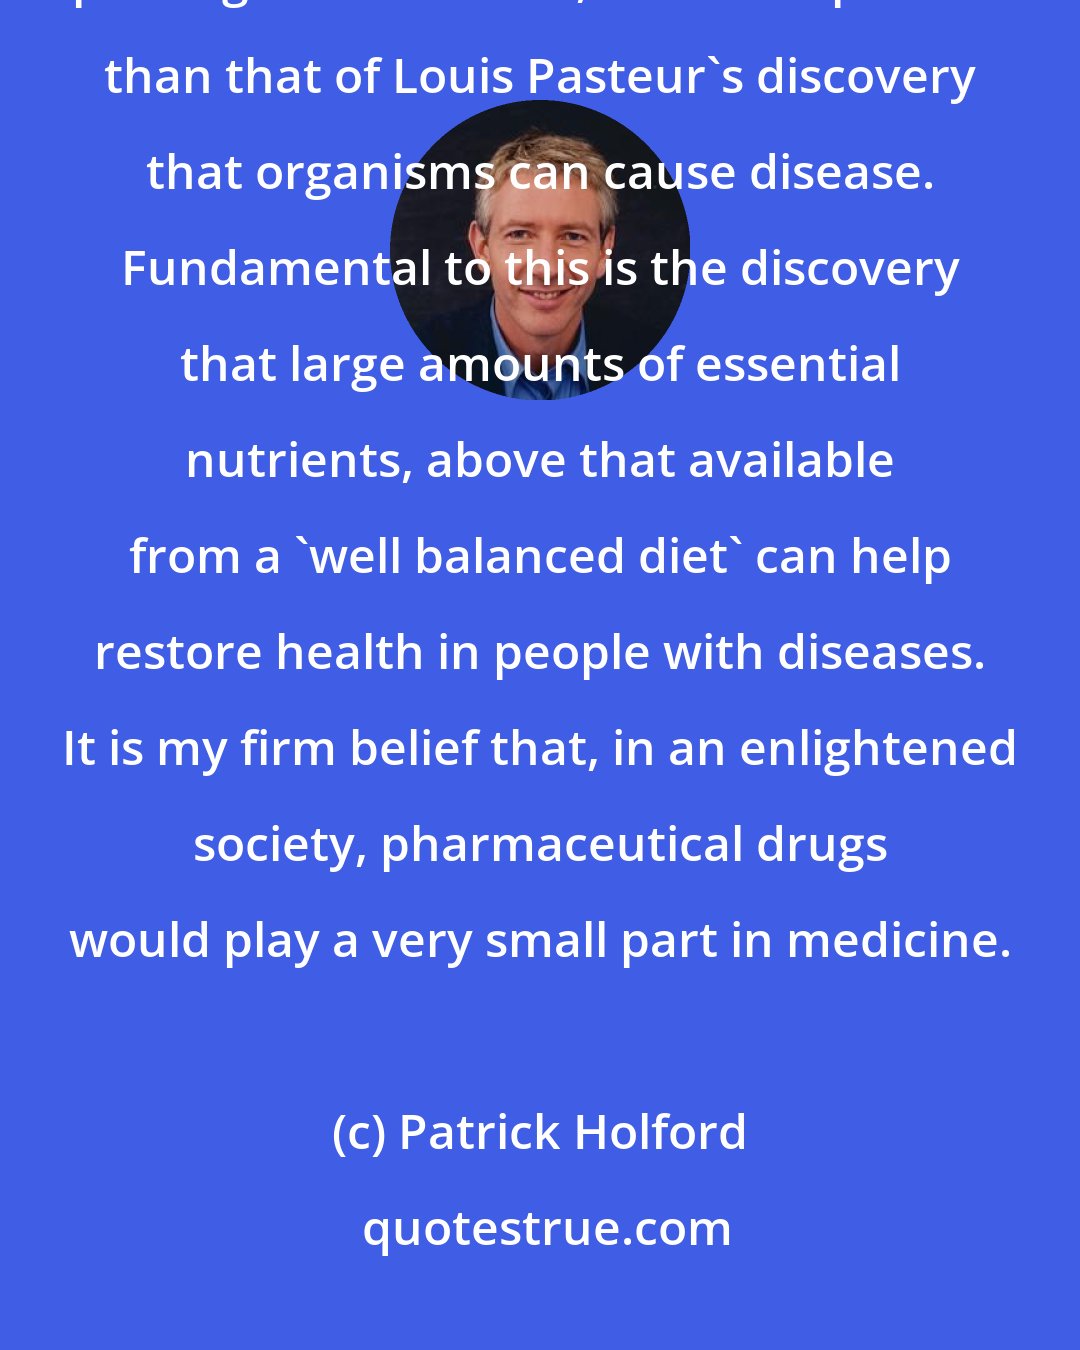 Patrick Holford: The fundamental concept of optimum nutrition heralds an entire new paradigm in medicine, no less important than that of Louis Pasteur's discovery that organisms can cause disease. Fundamental to this is the discovery that large amounts of essential nutrients, above that available from a 'well balanced diet' can help restore health in people with diseases. It is my firm belief that, in an enlightened society, pharmaceutical drugs would play a very small part in medicine.